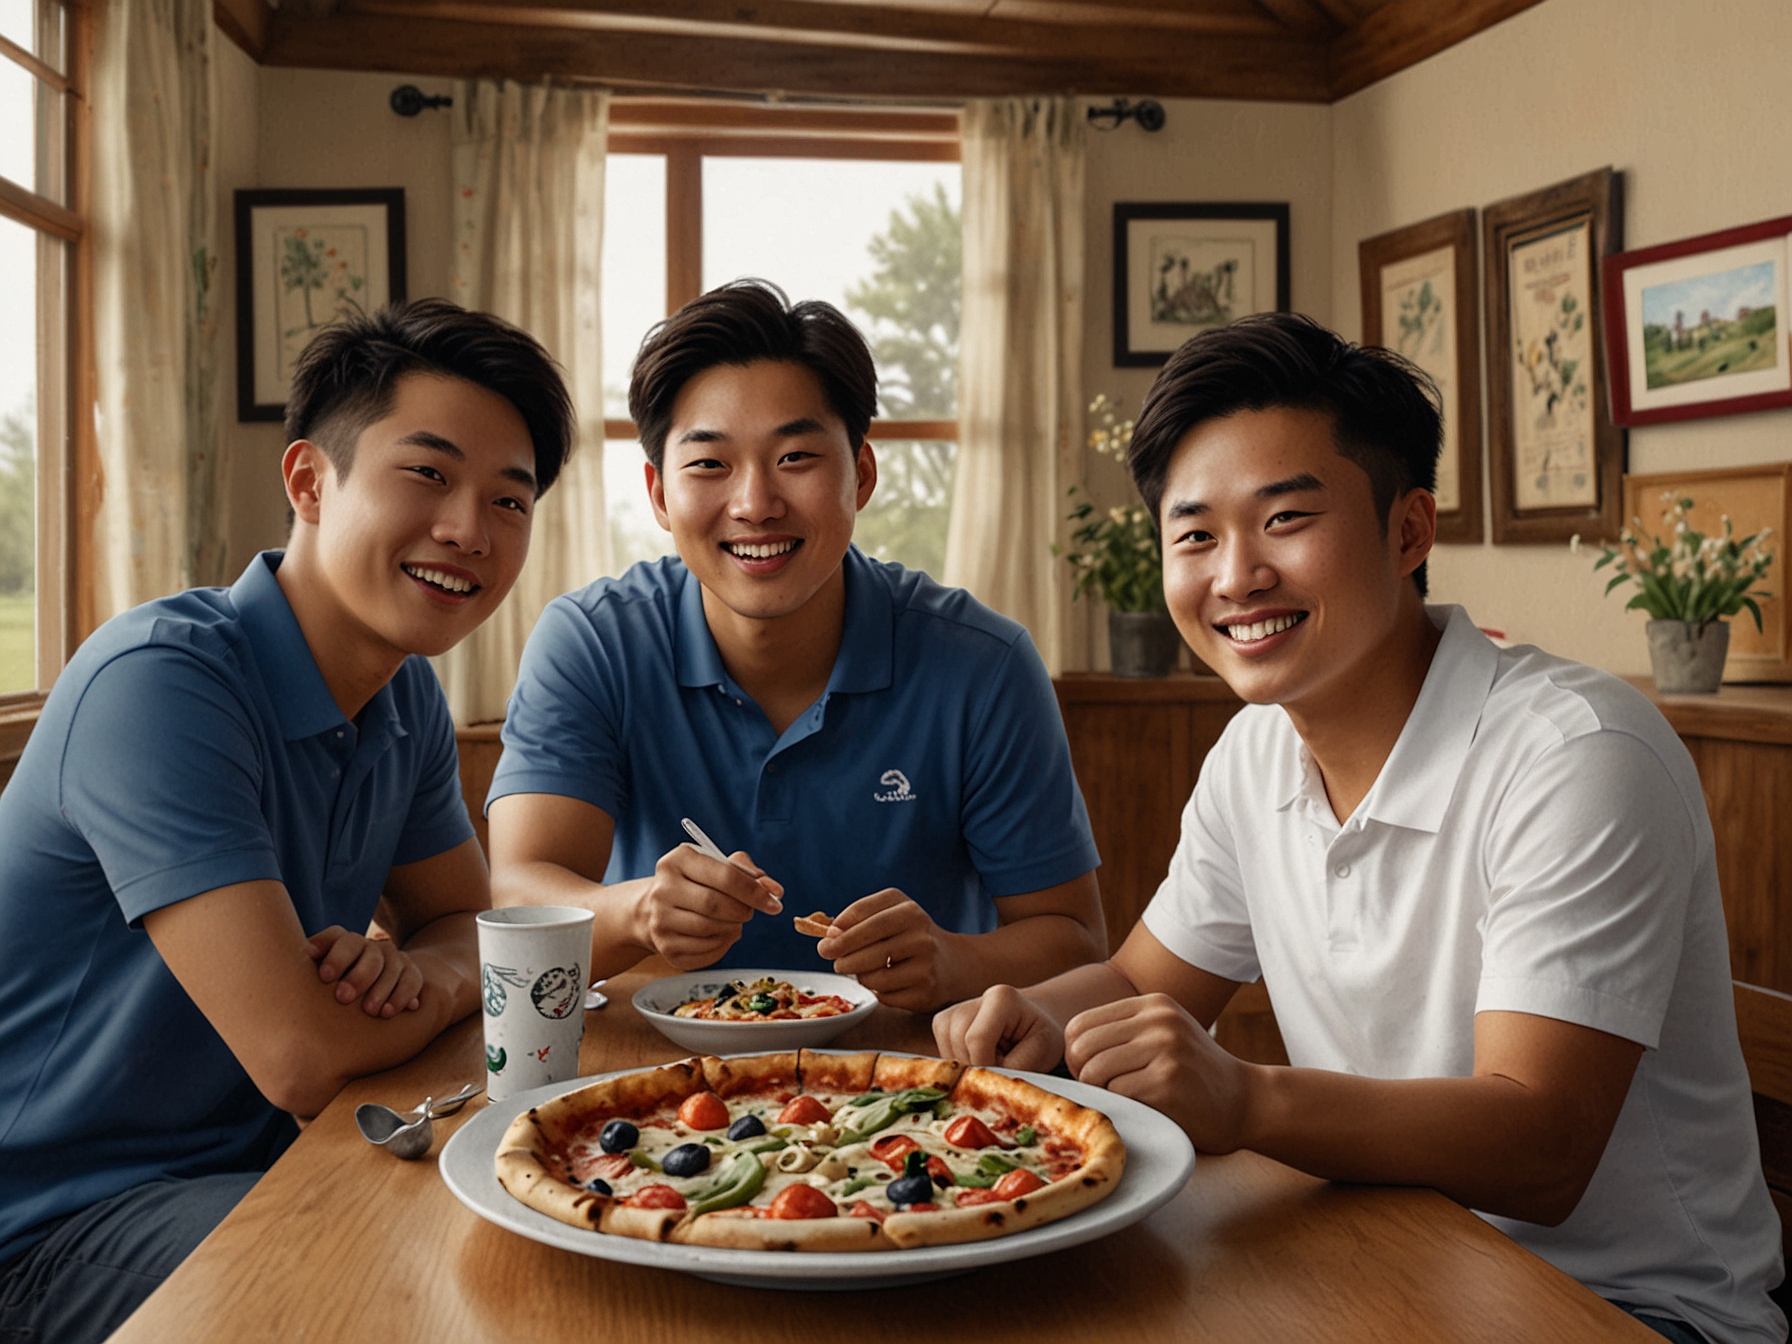 Tom Kim enjoys a lively pizza party with friends and family before the tournament, which adds a relatable and human element to his journey in the golfing world.